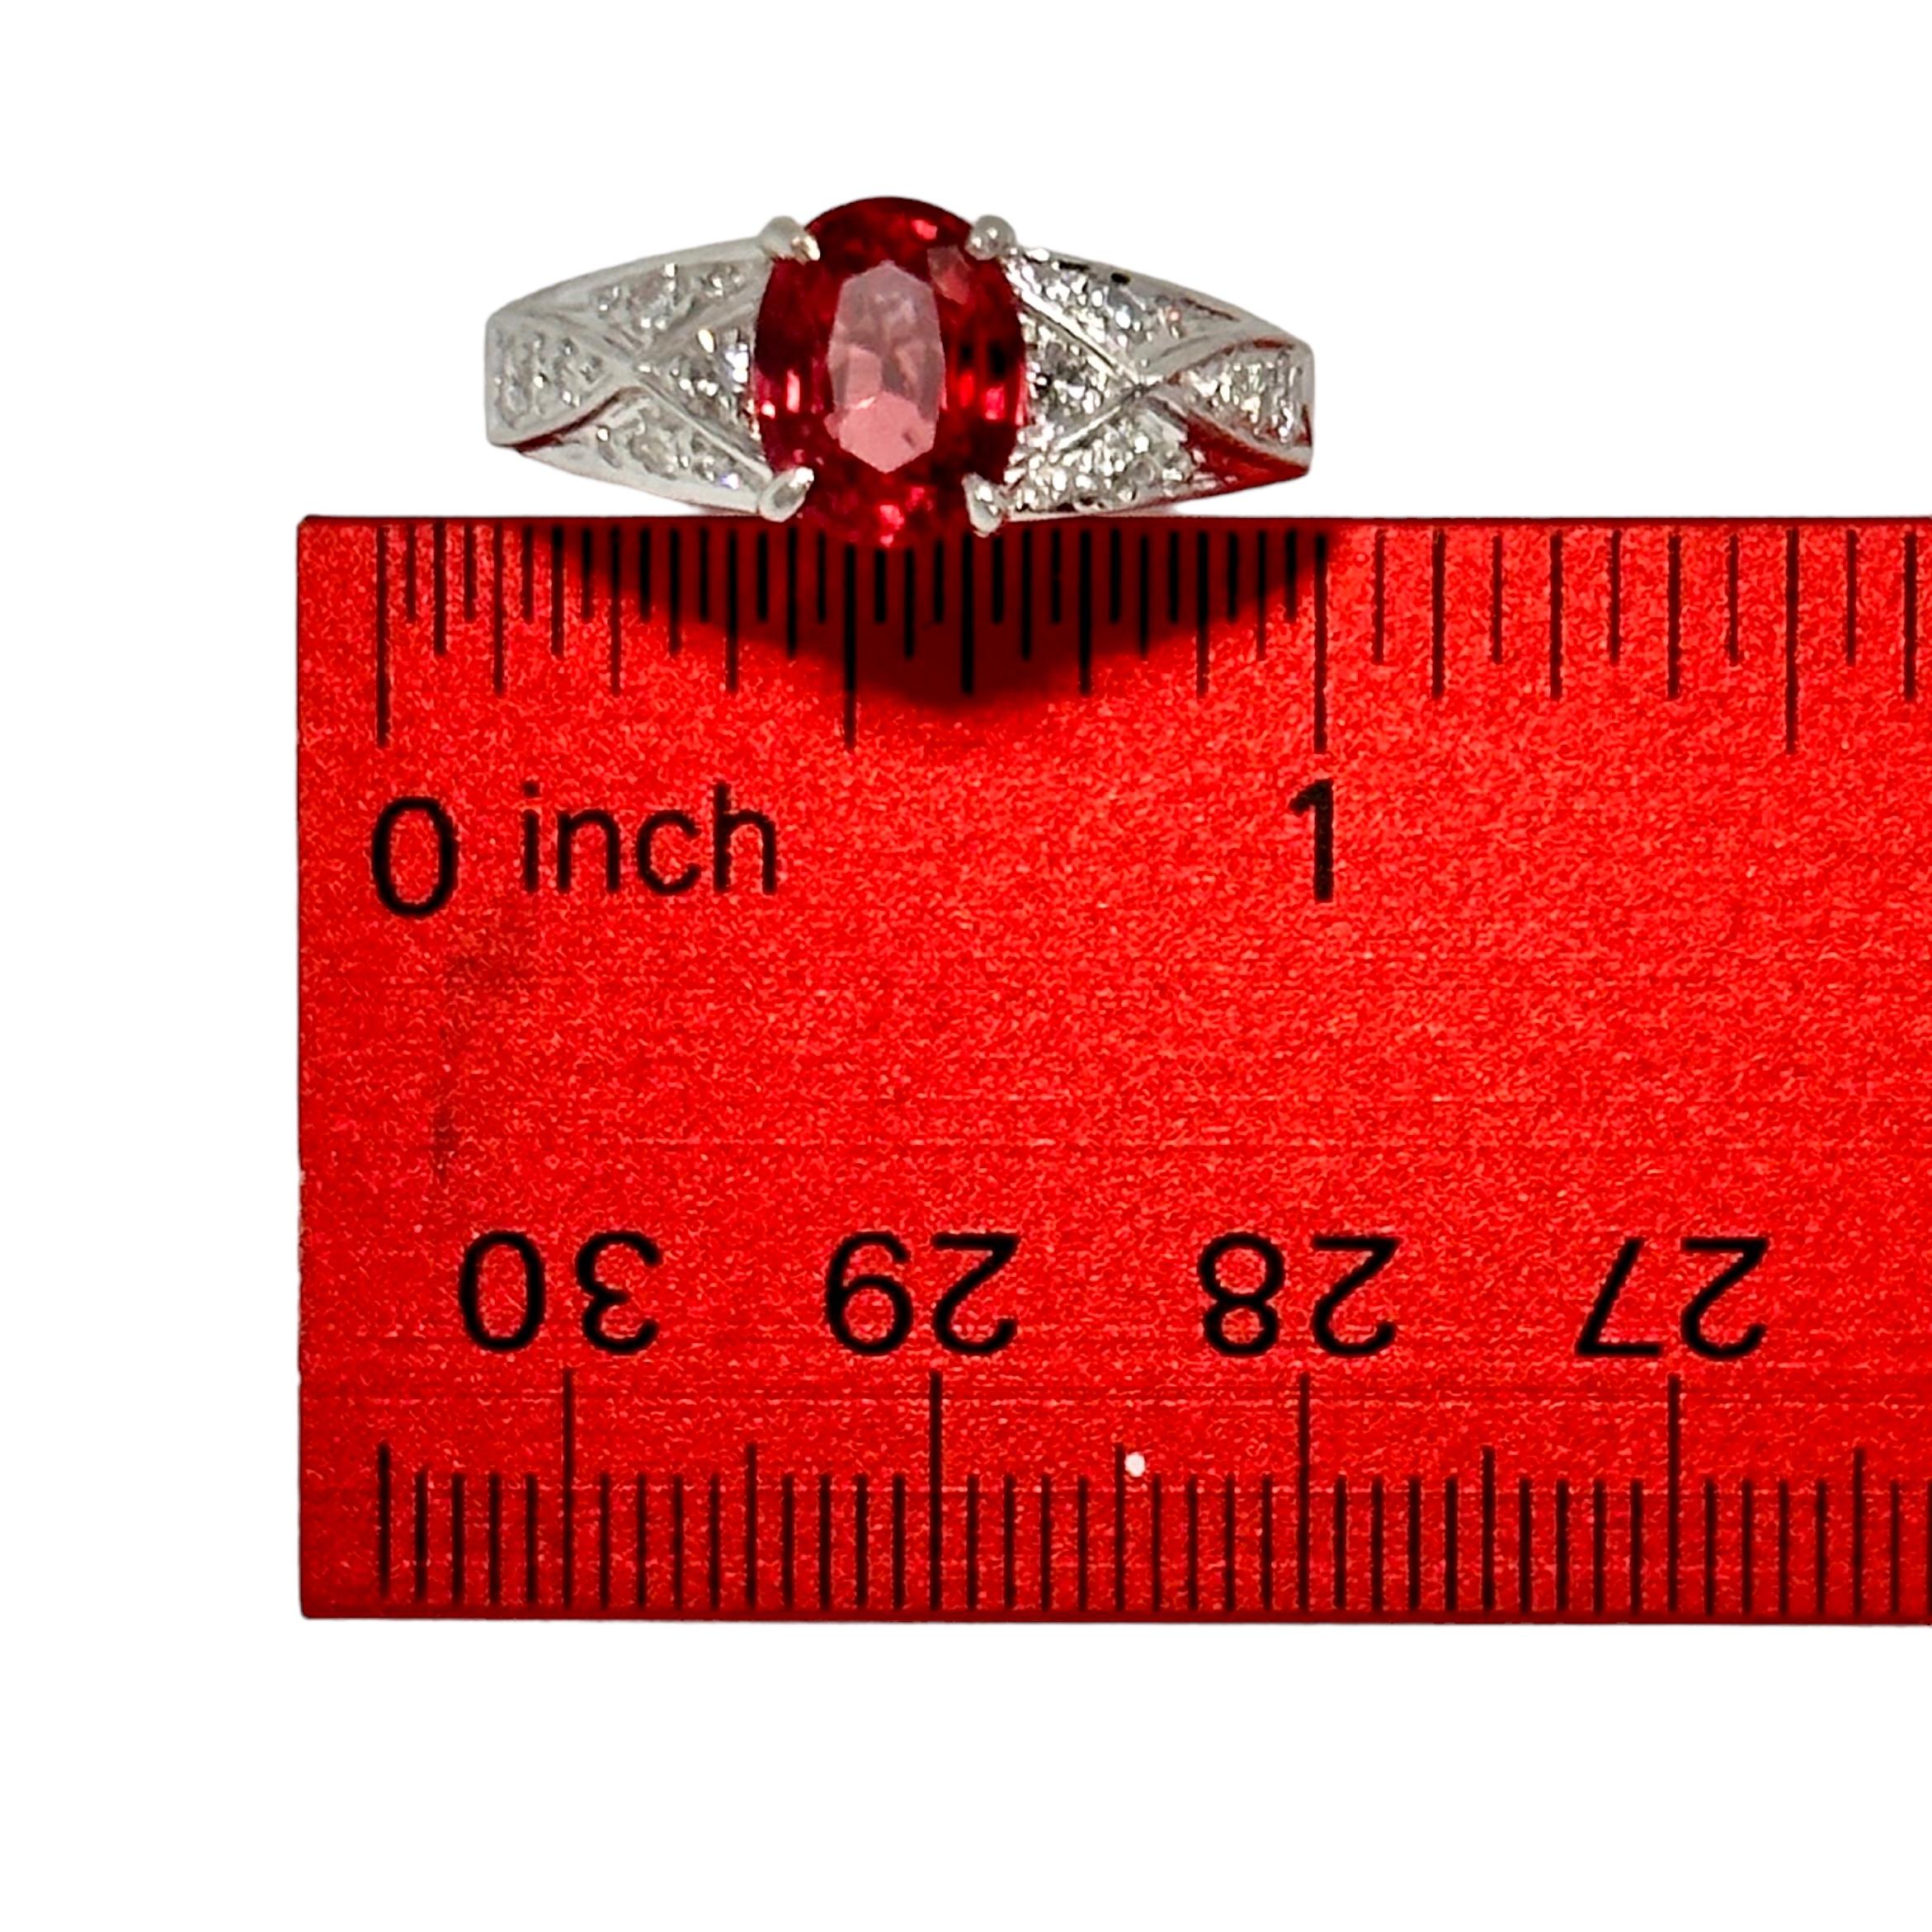 Vivid Oval Shaped Orangy-Red Burmese Spinel set in Platinum Ring with Diamonds 5